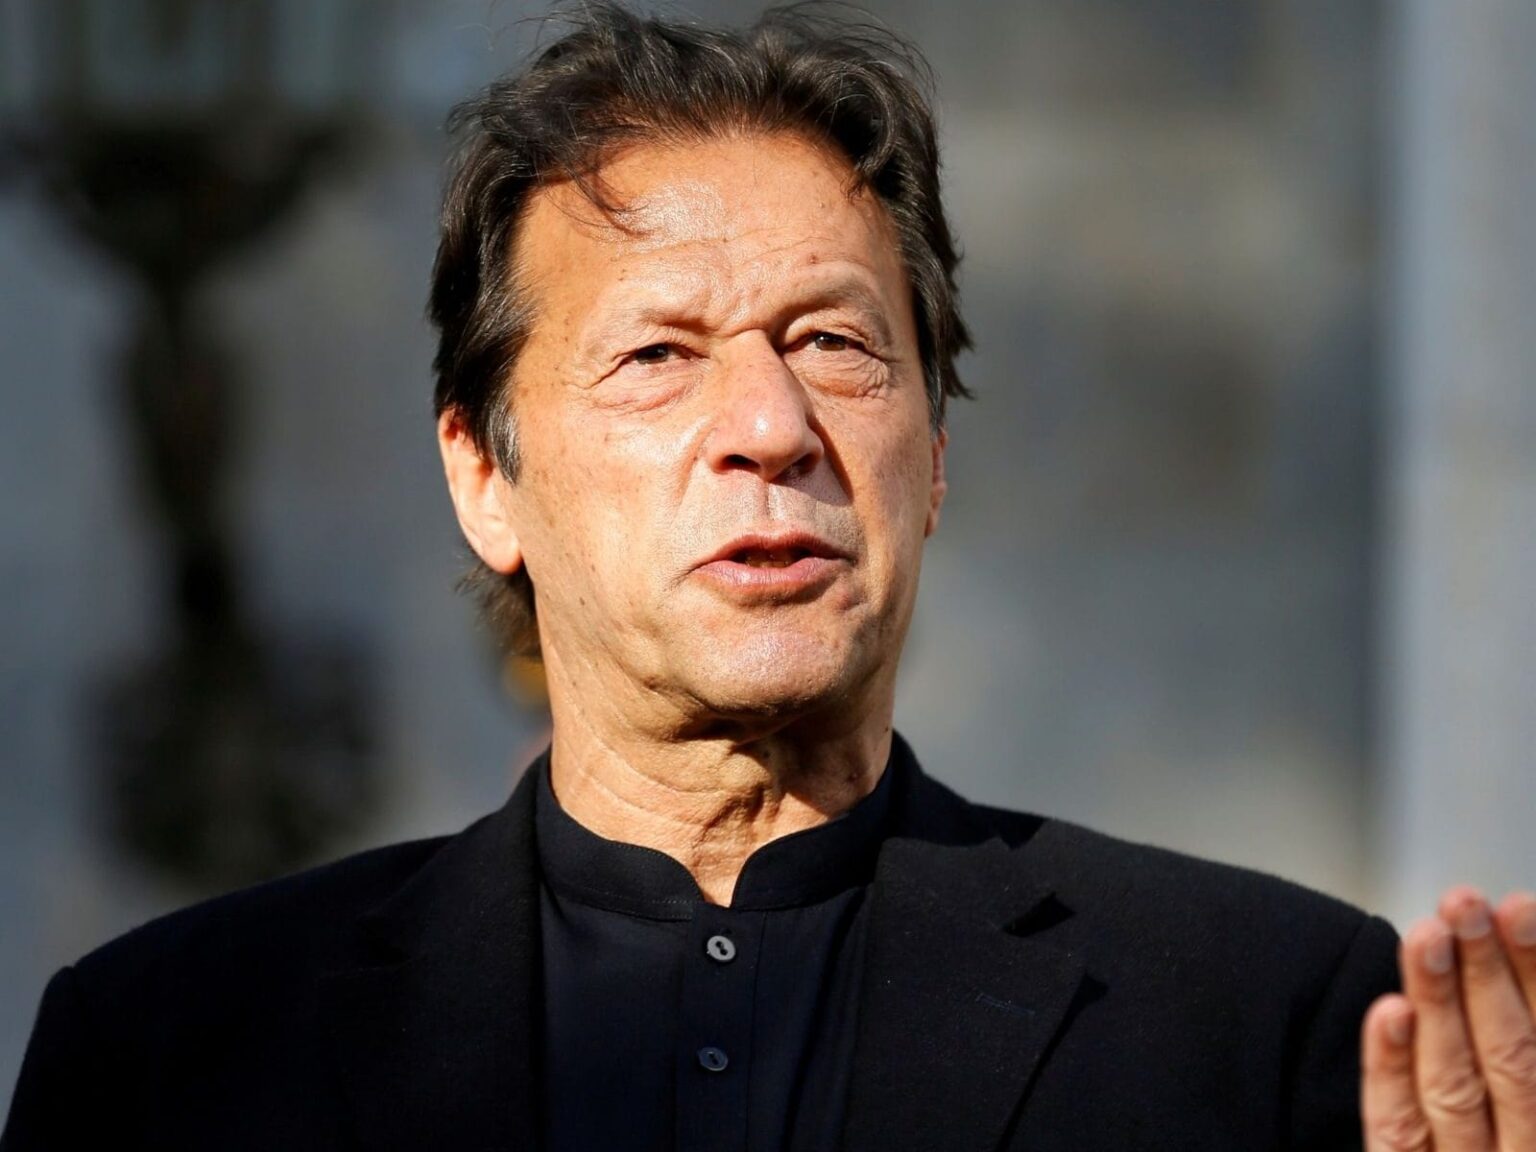 Pakistan's military and the US remove Imran from power